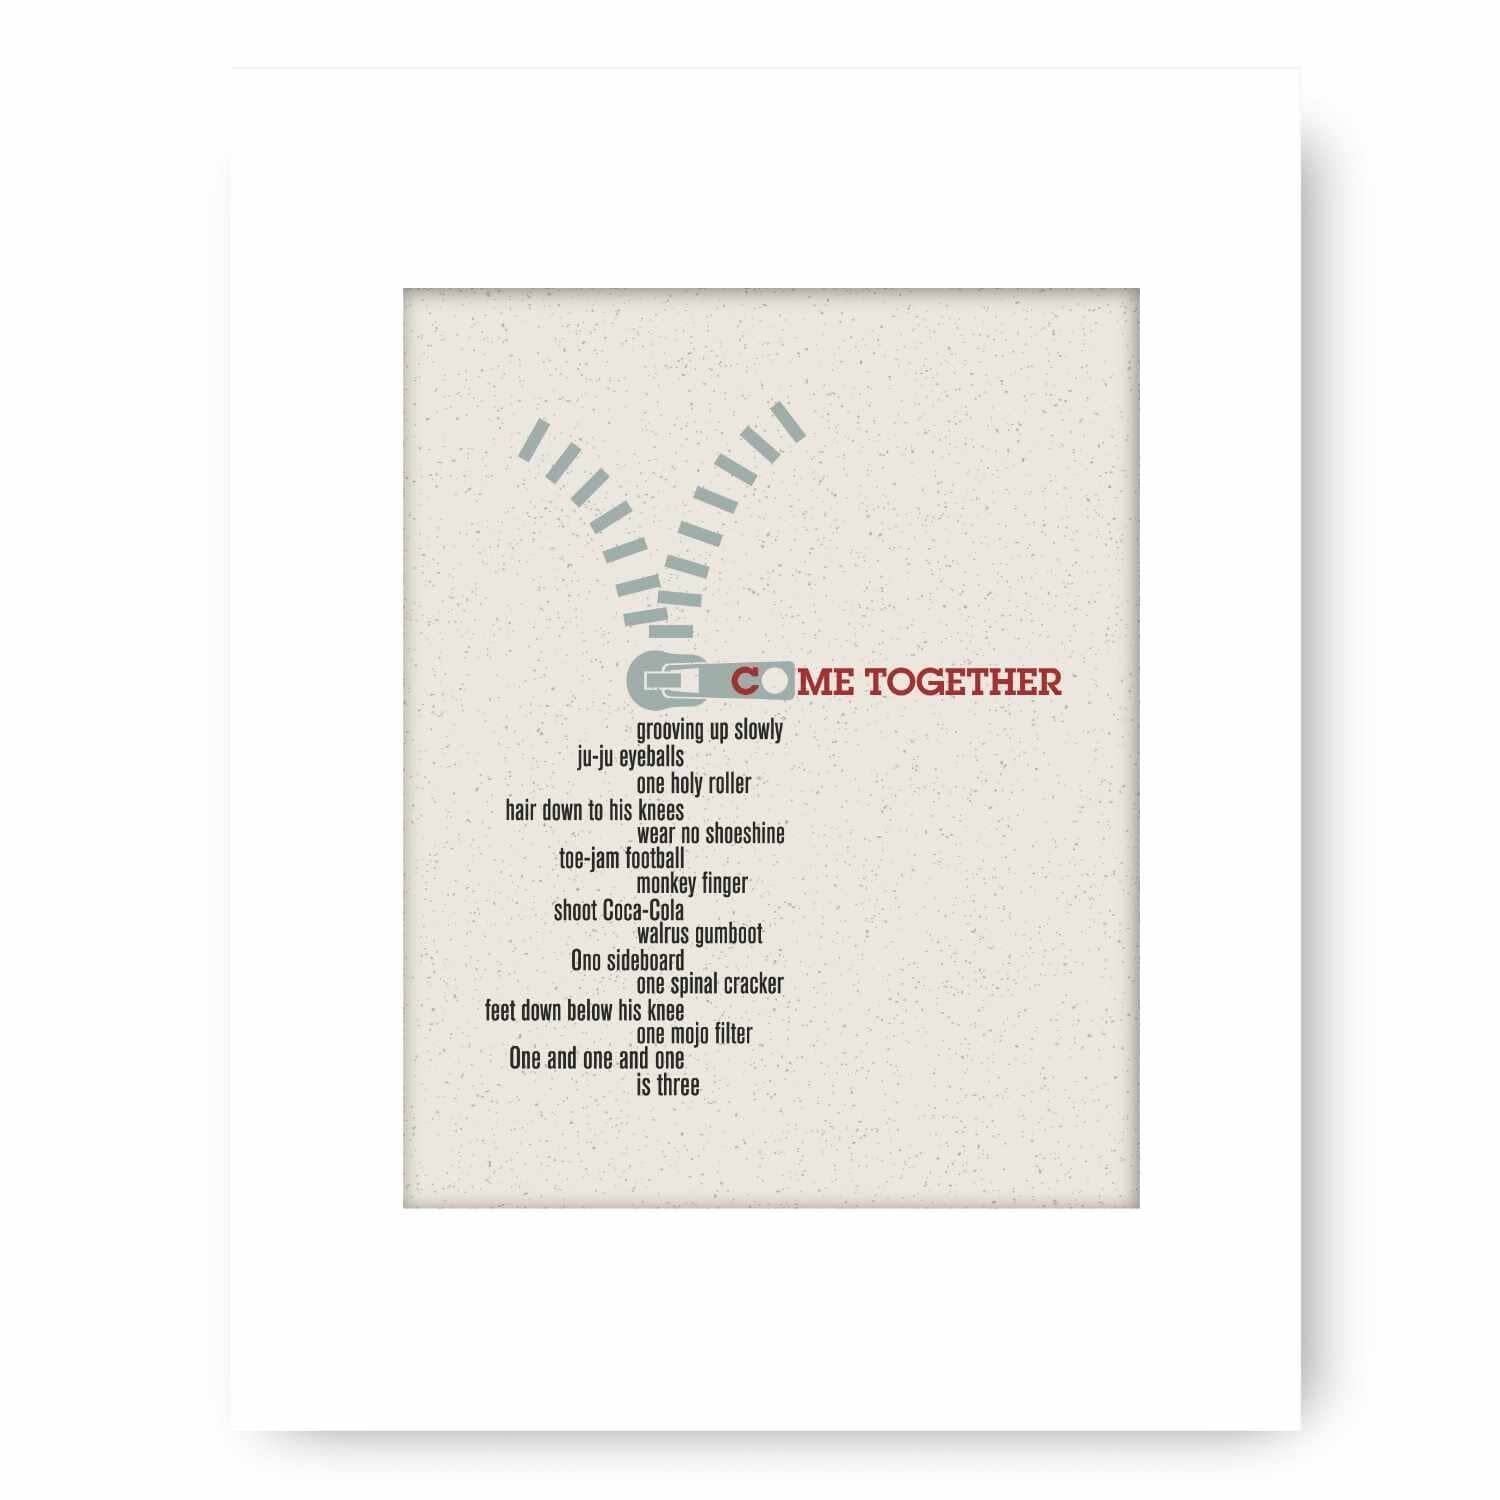 Come Together by the Beatles - Song Lyric Art Wall Print Song Lyrics Art Song Lyrics Art 8x10 White Matted Print 